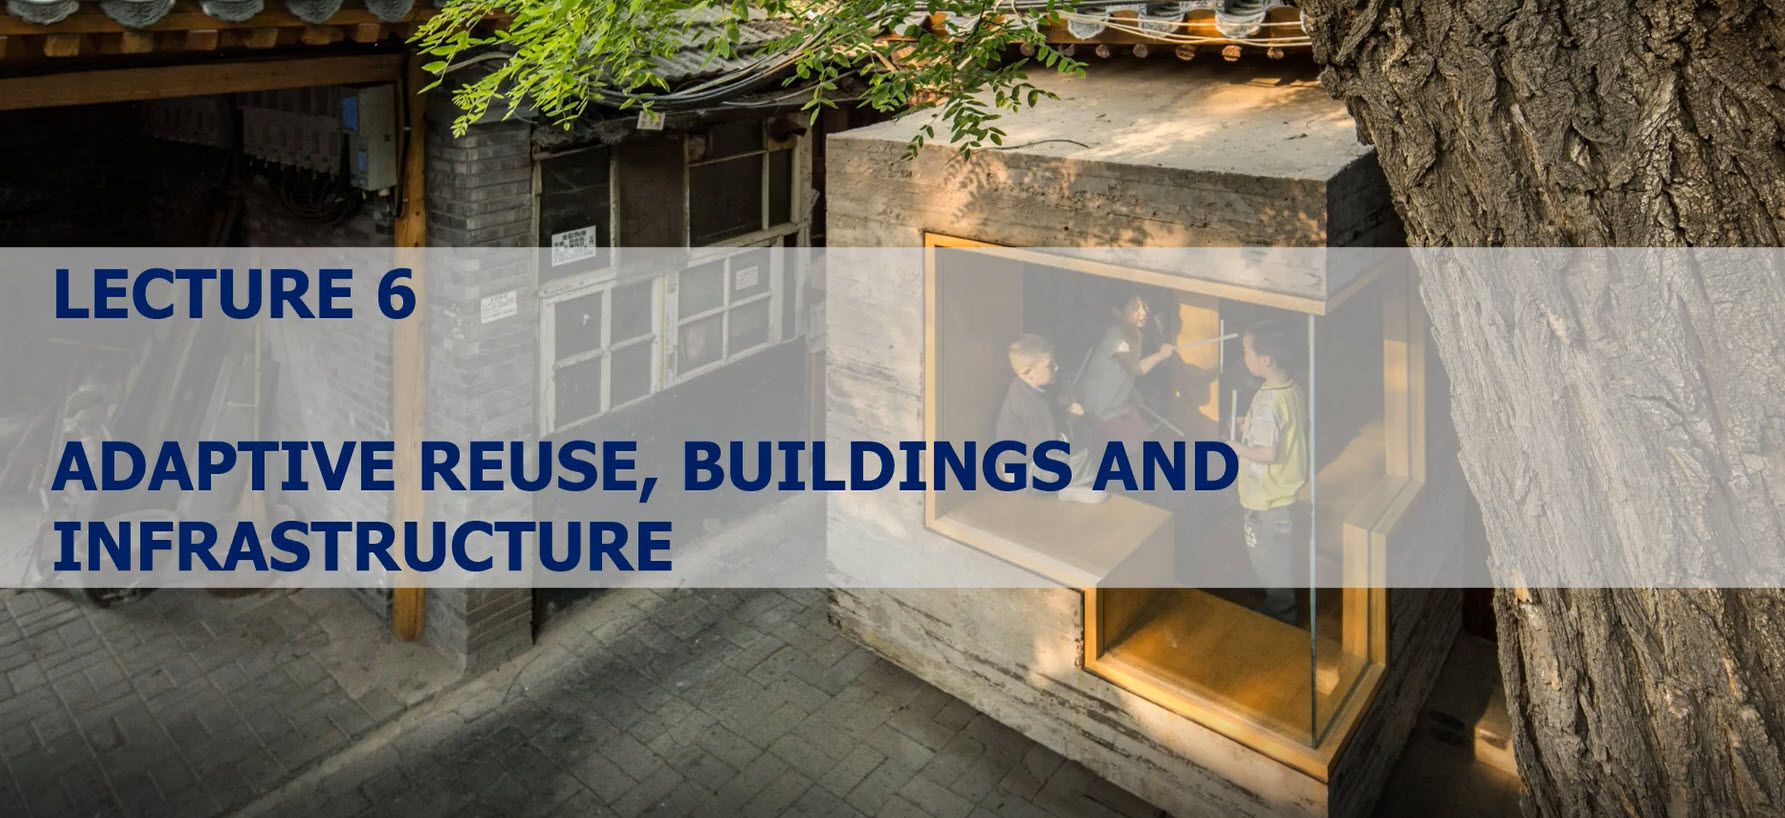 Lecture 21:  Adaptive Reuse, Buildings and Infrastructure Part 2 (narrated version)